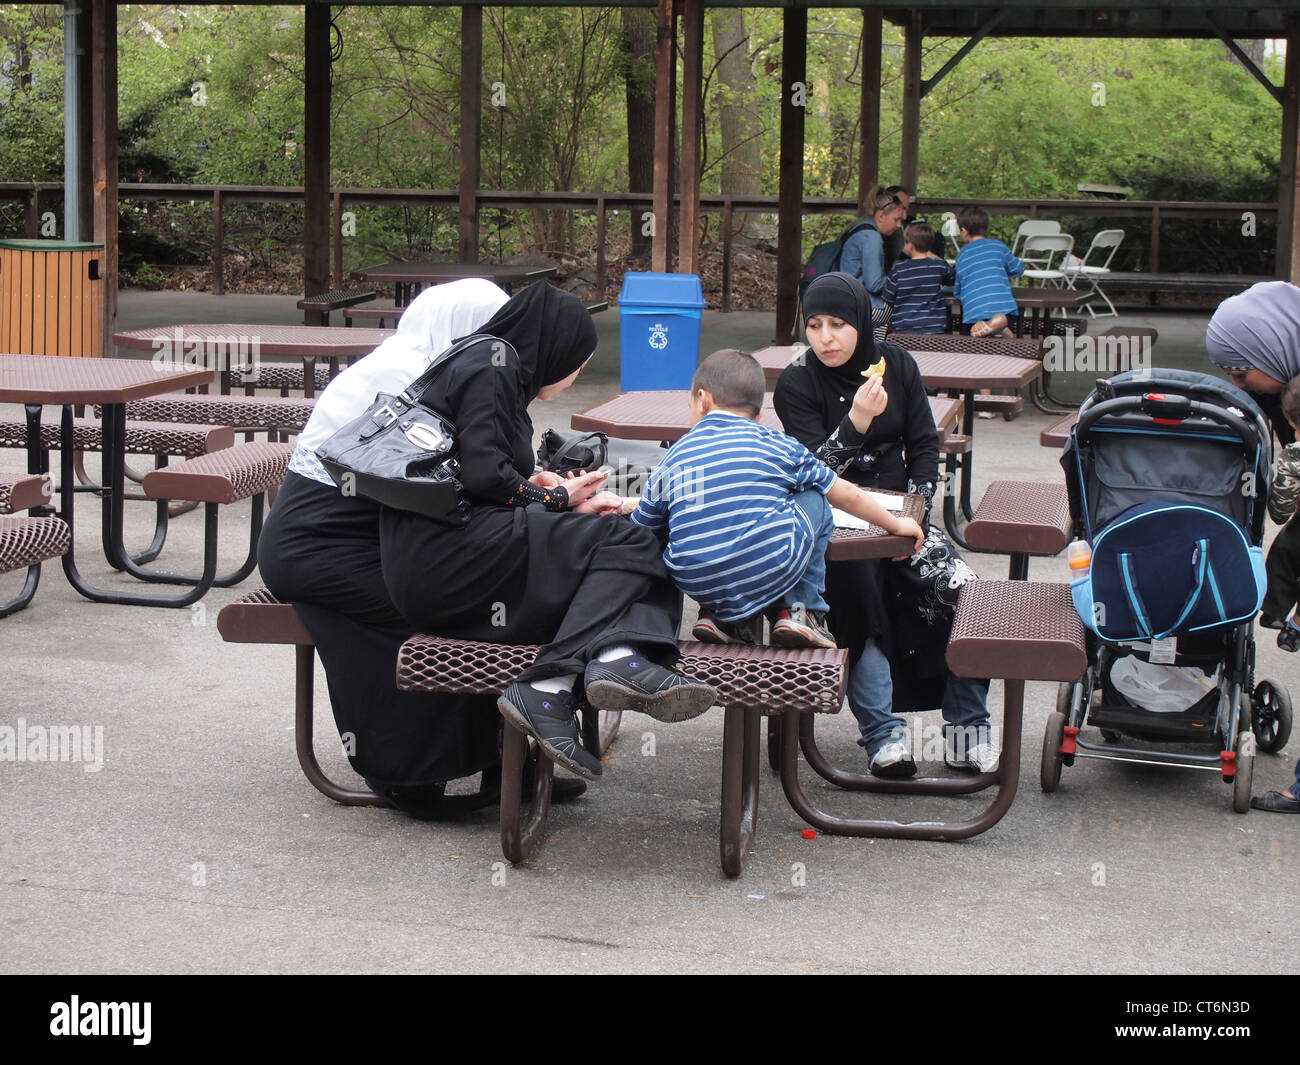 Muslim women and children at a picnic table at the Bronx Zoo, Bronx, New York, USA, April 18, 2012, © Katharine Andriotis Stock Photo